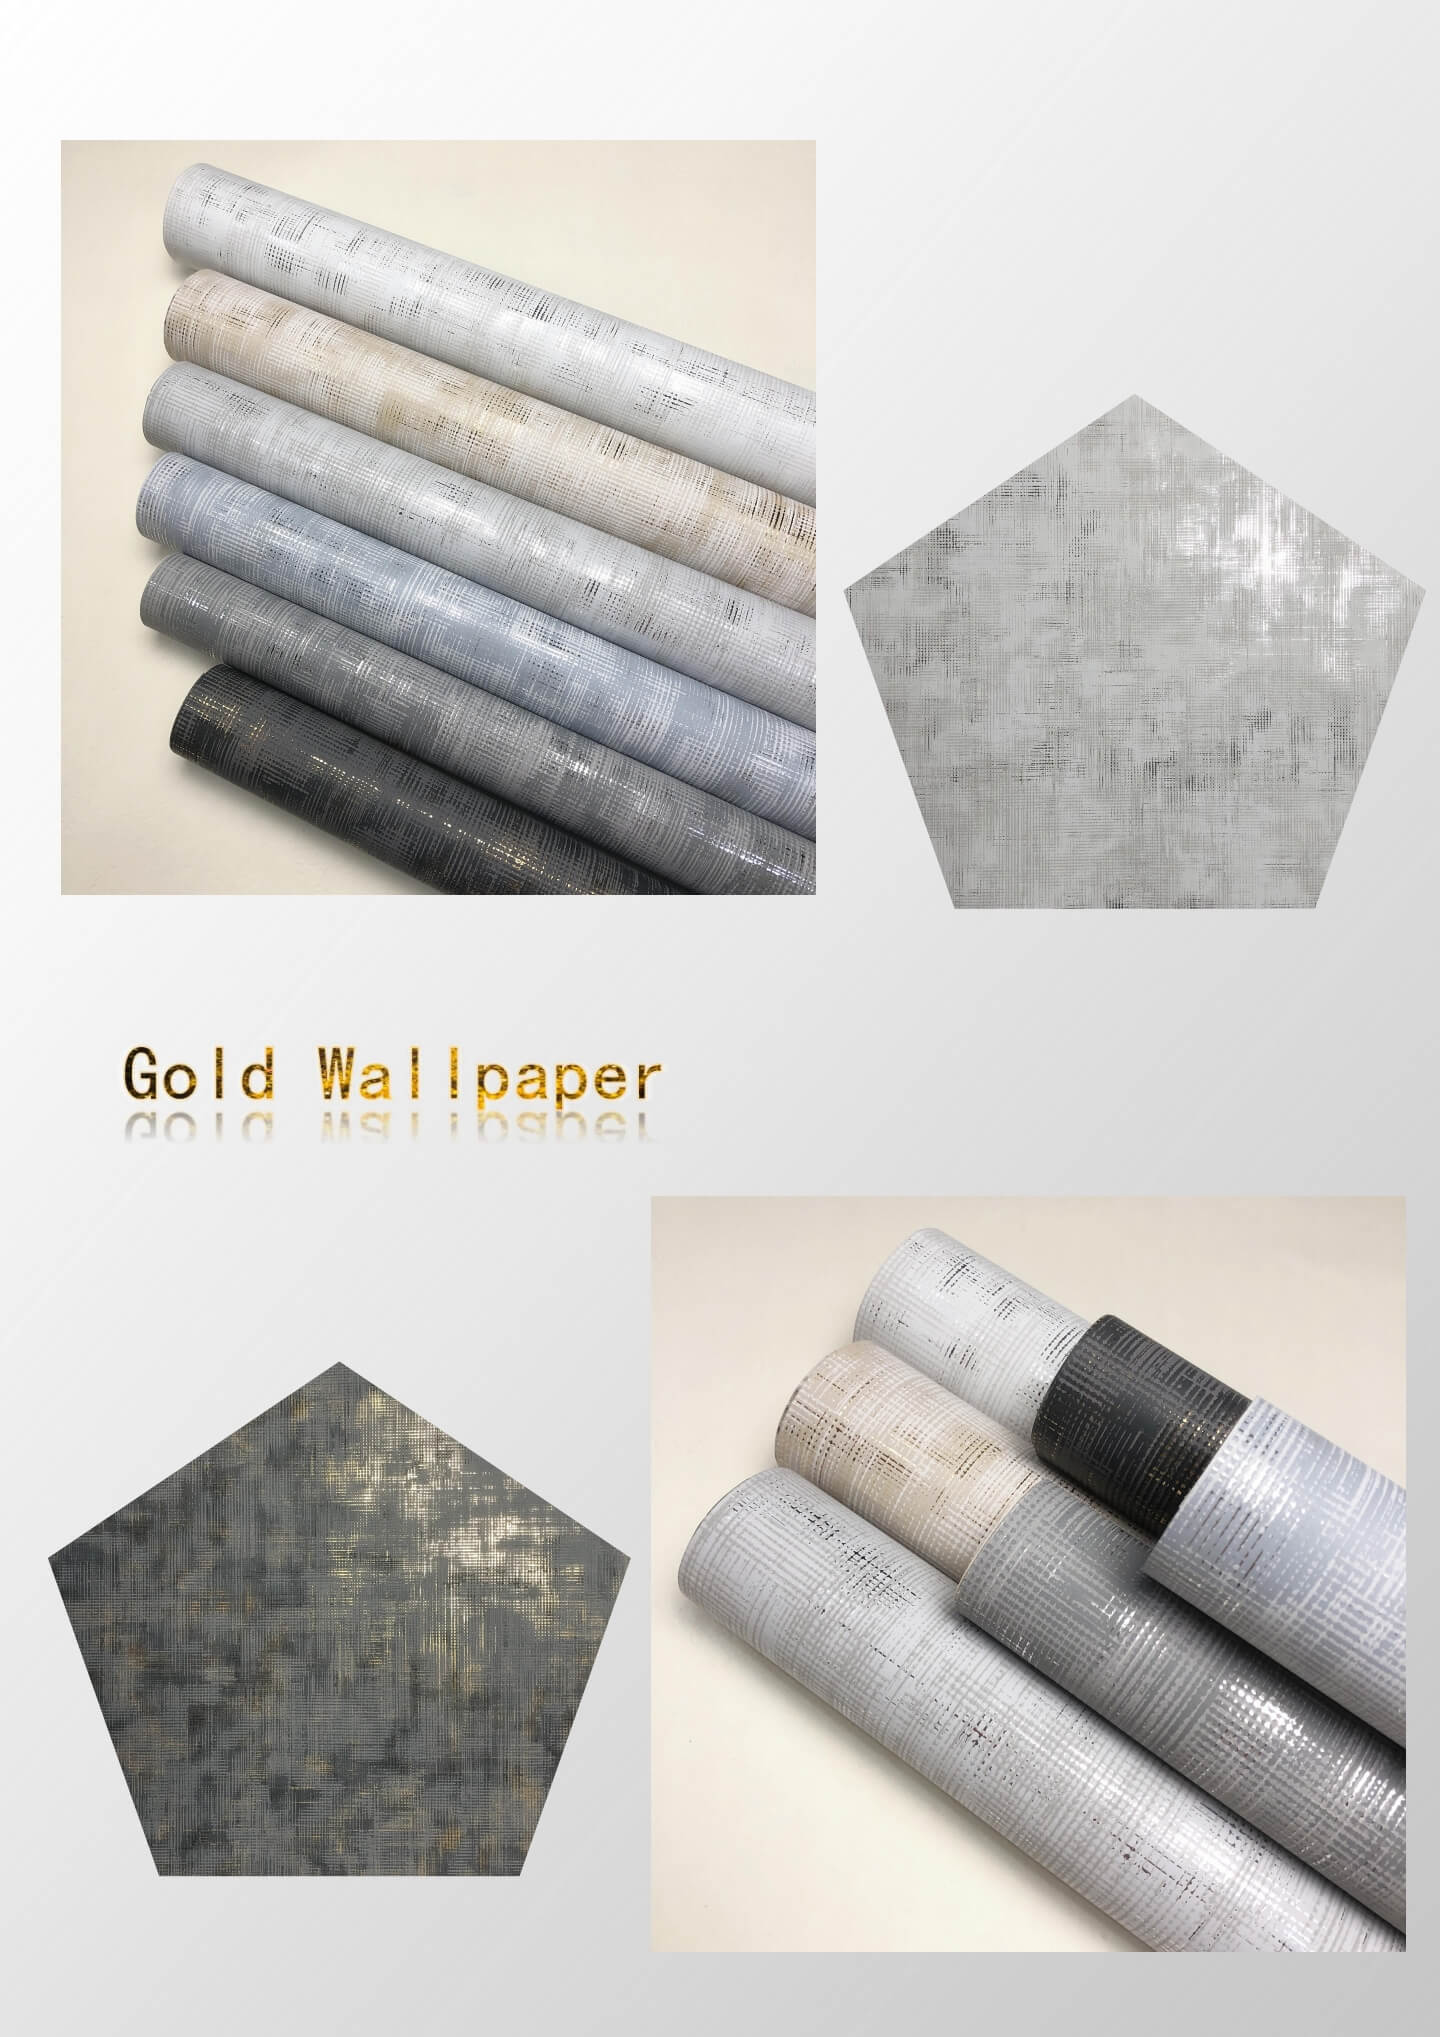 3D Metallic Wallpaper Wallcoverings For Home Hotel Wall Decoration (17)